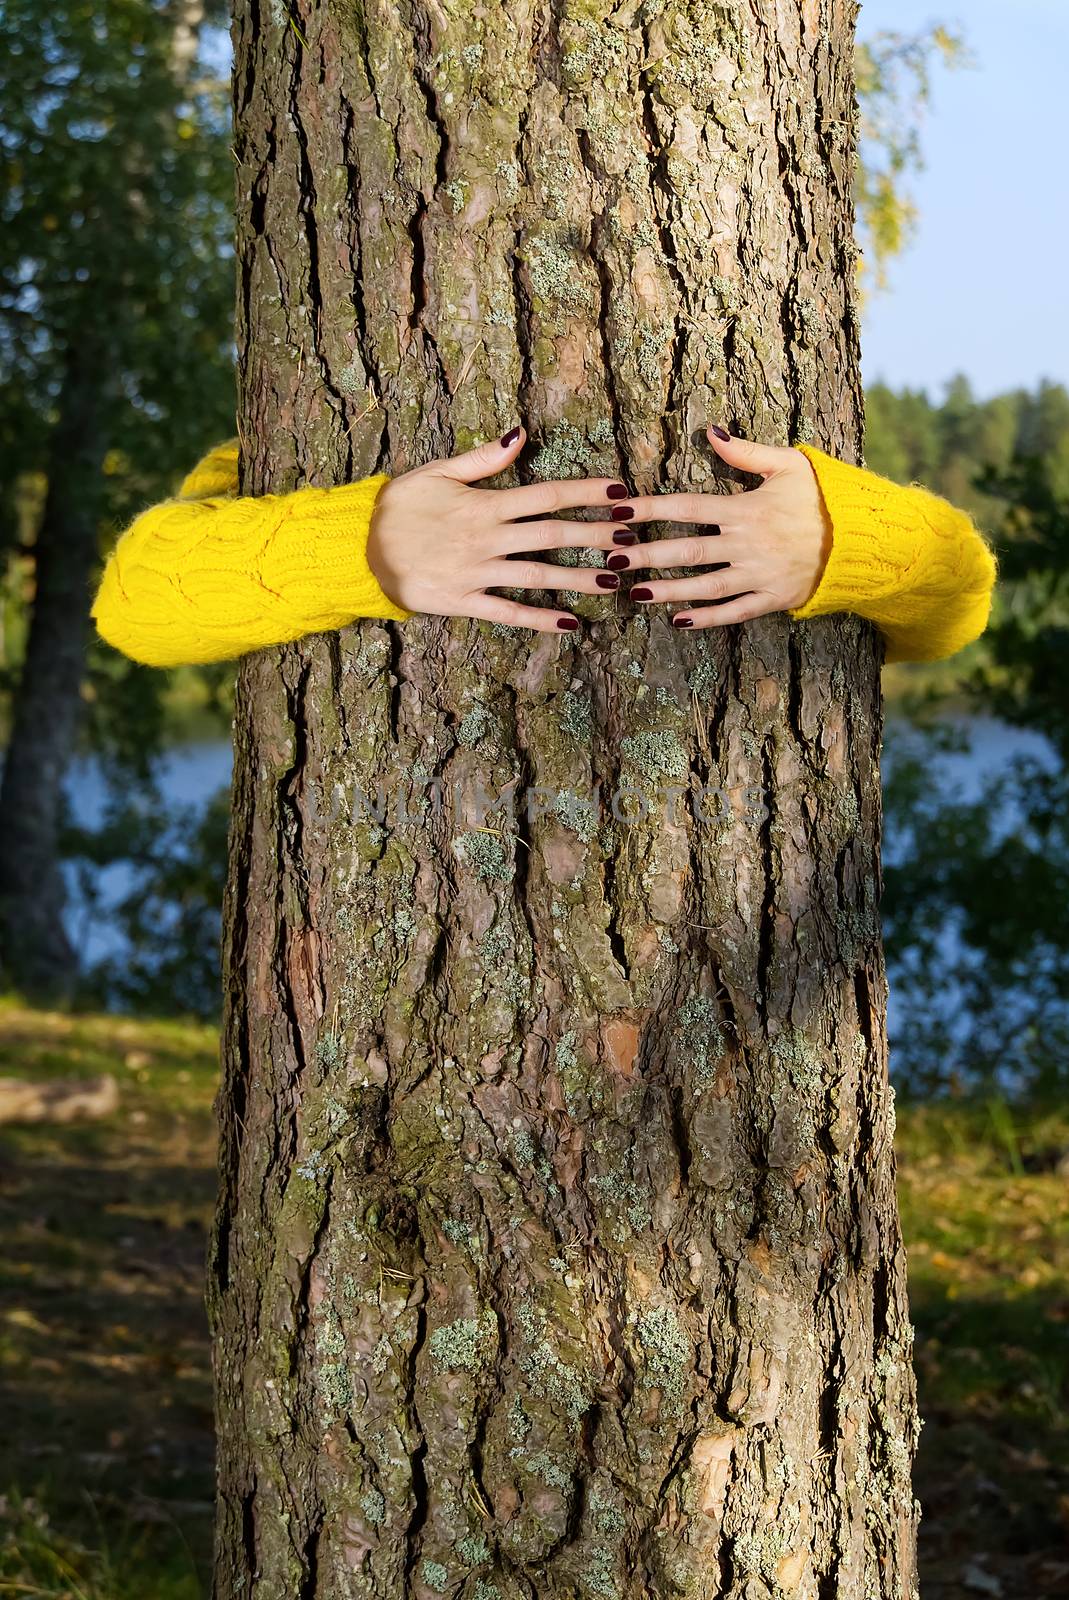 Woman hands hugging pine tree trunk in autumn forest Ecology and environment concept, eco lifestyle - change the world, protection for life and planet by PhotoTime